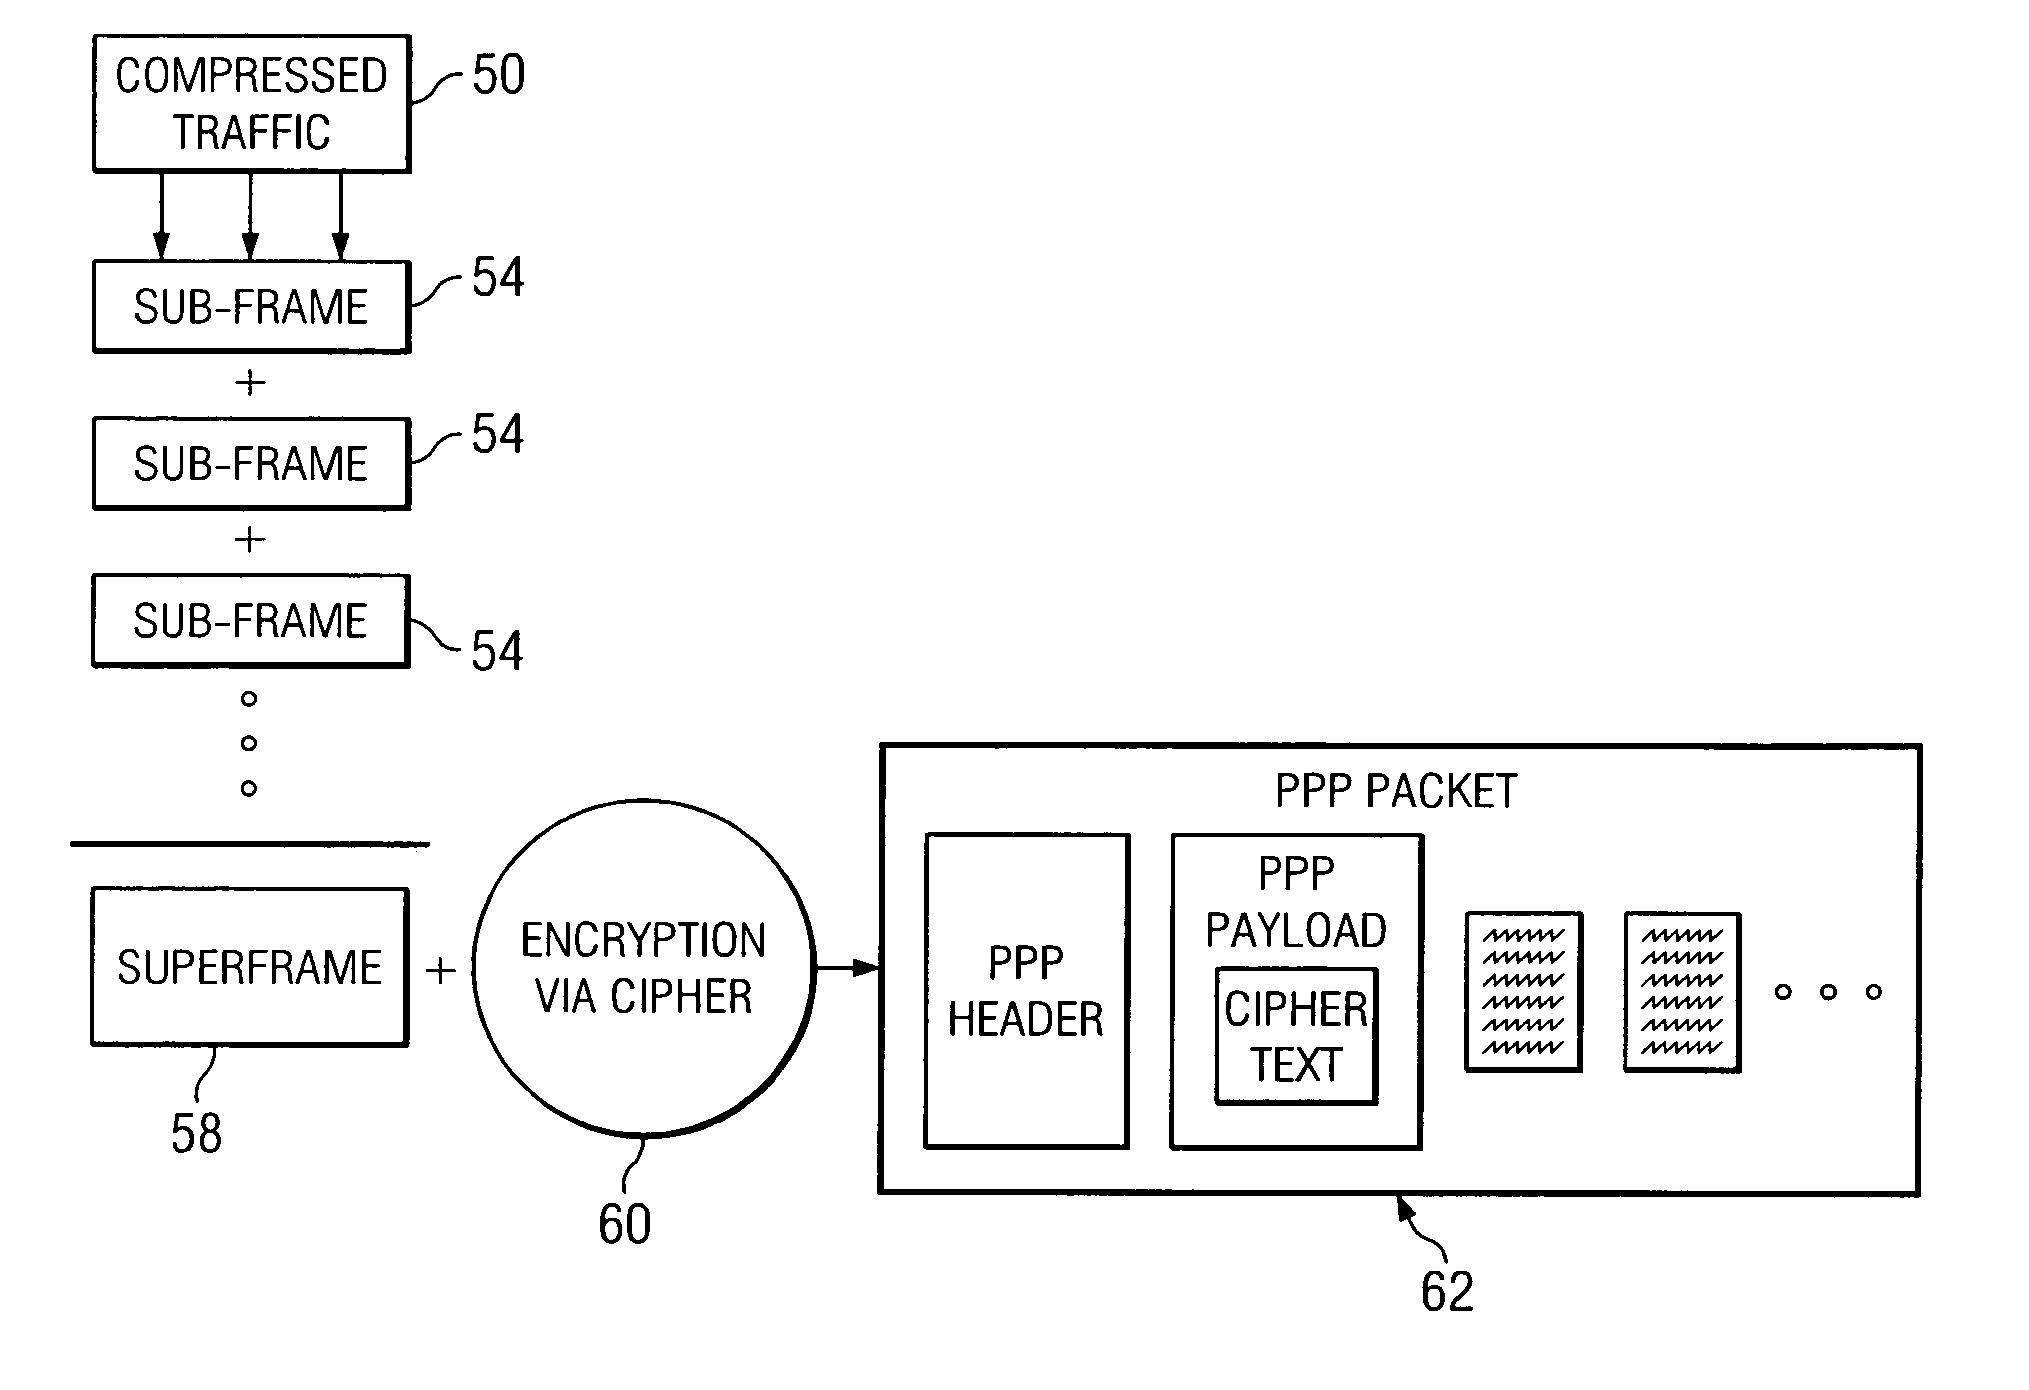 System and method for encrypting data using a cipher text in a communications environment